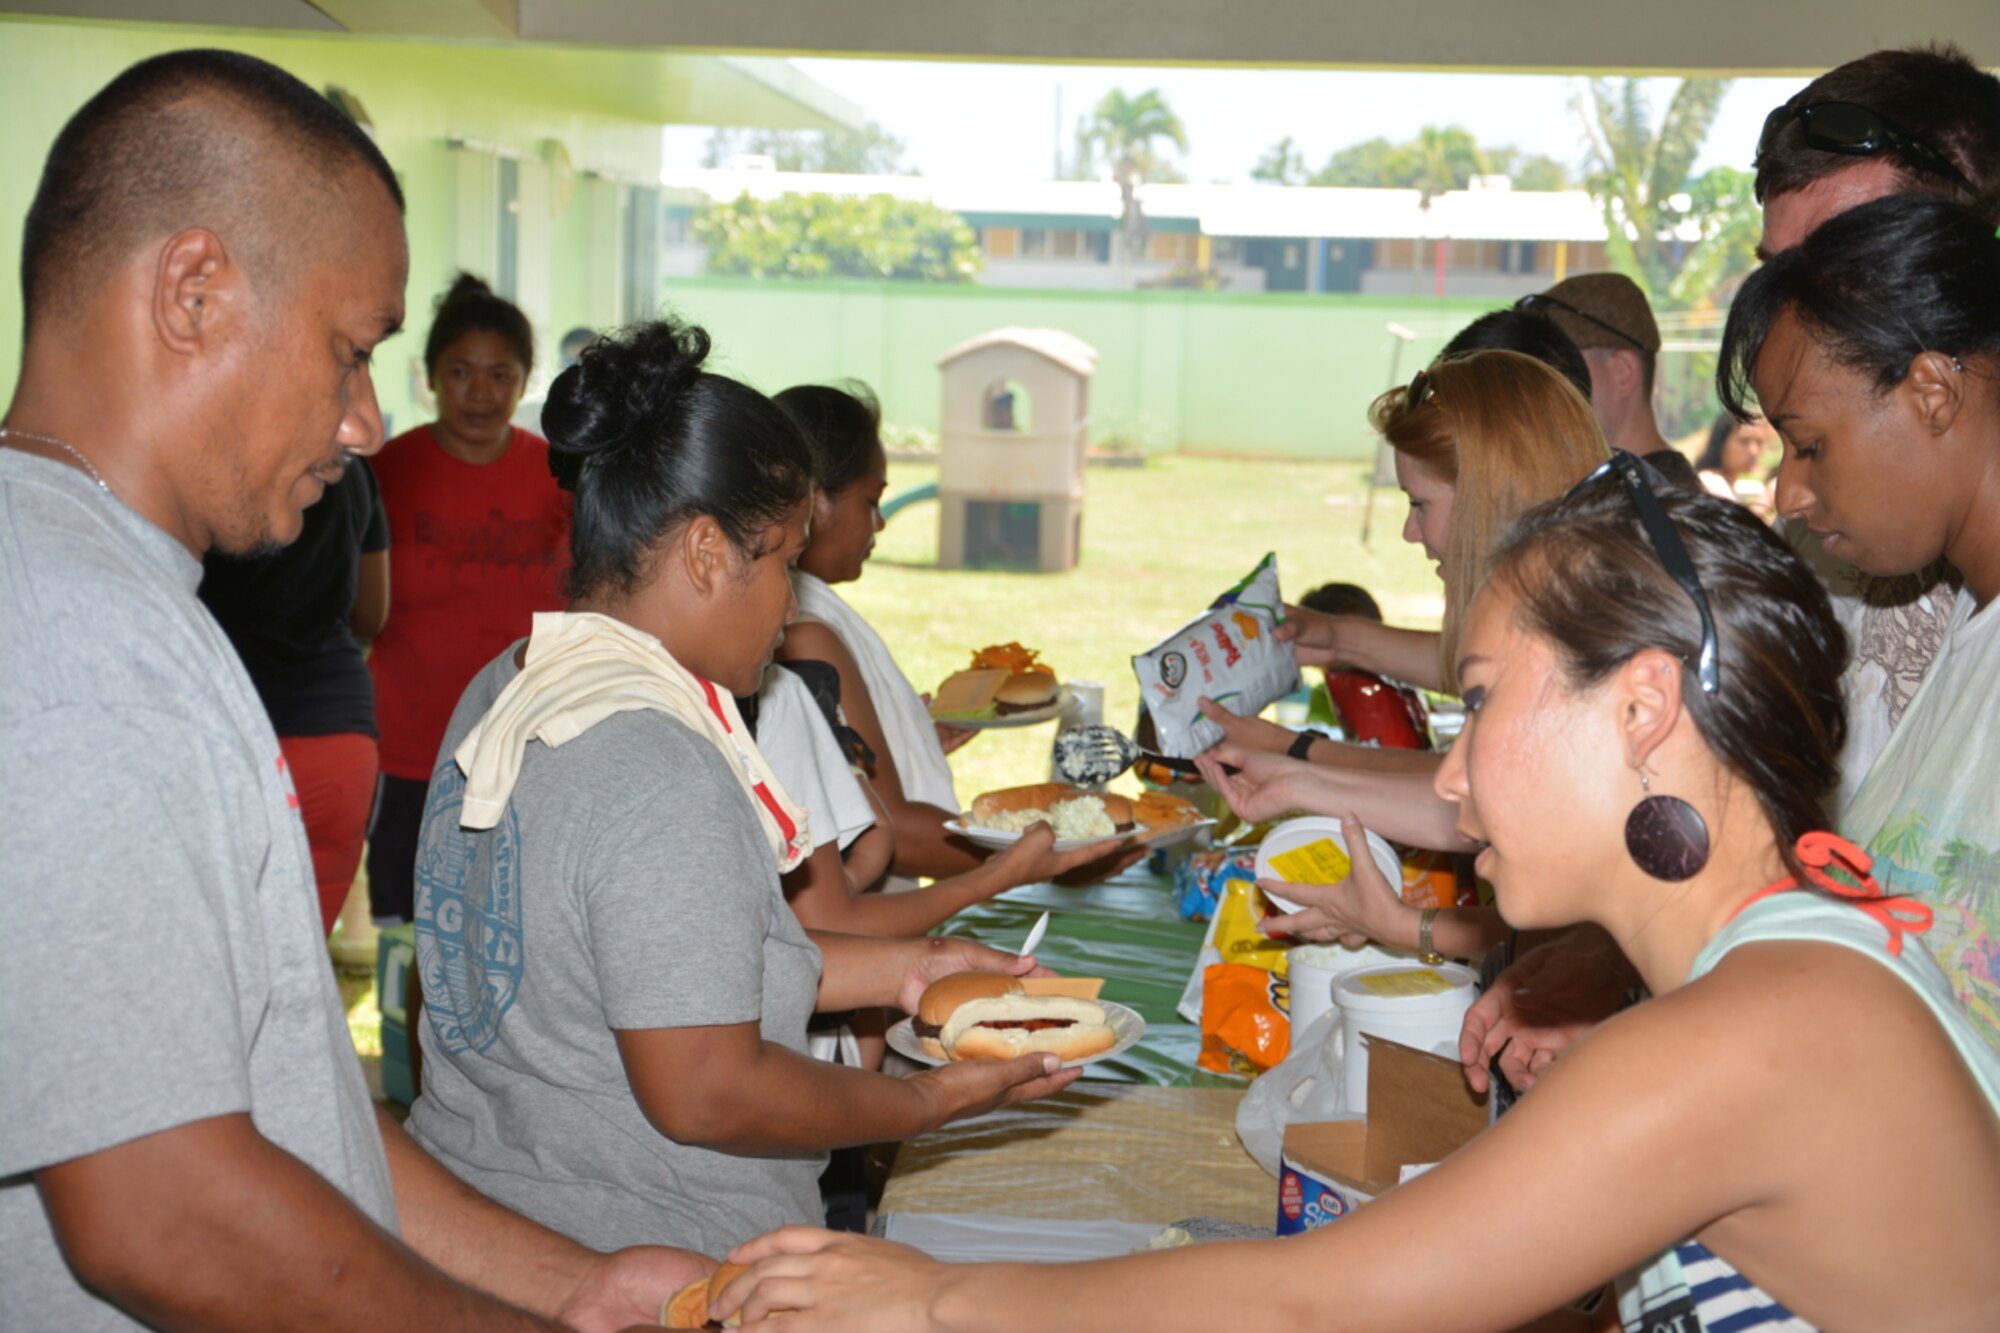 Members of the 36th Operations Support Squadron and family members serve barbecue meals to residents of the Guma San Jose Homeless Shelter in Dededo, Guam, April 12, 2014. The squadron volunteers assist shelter residents each quarter, providing meals as well as serving and cleaning. (U.S. Air Force courtesy photo/Released)